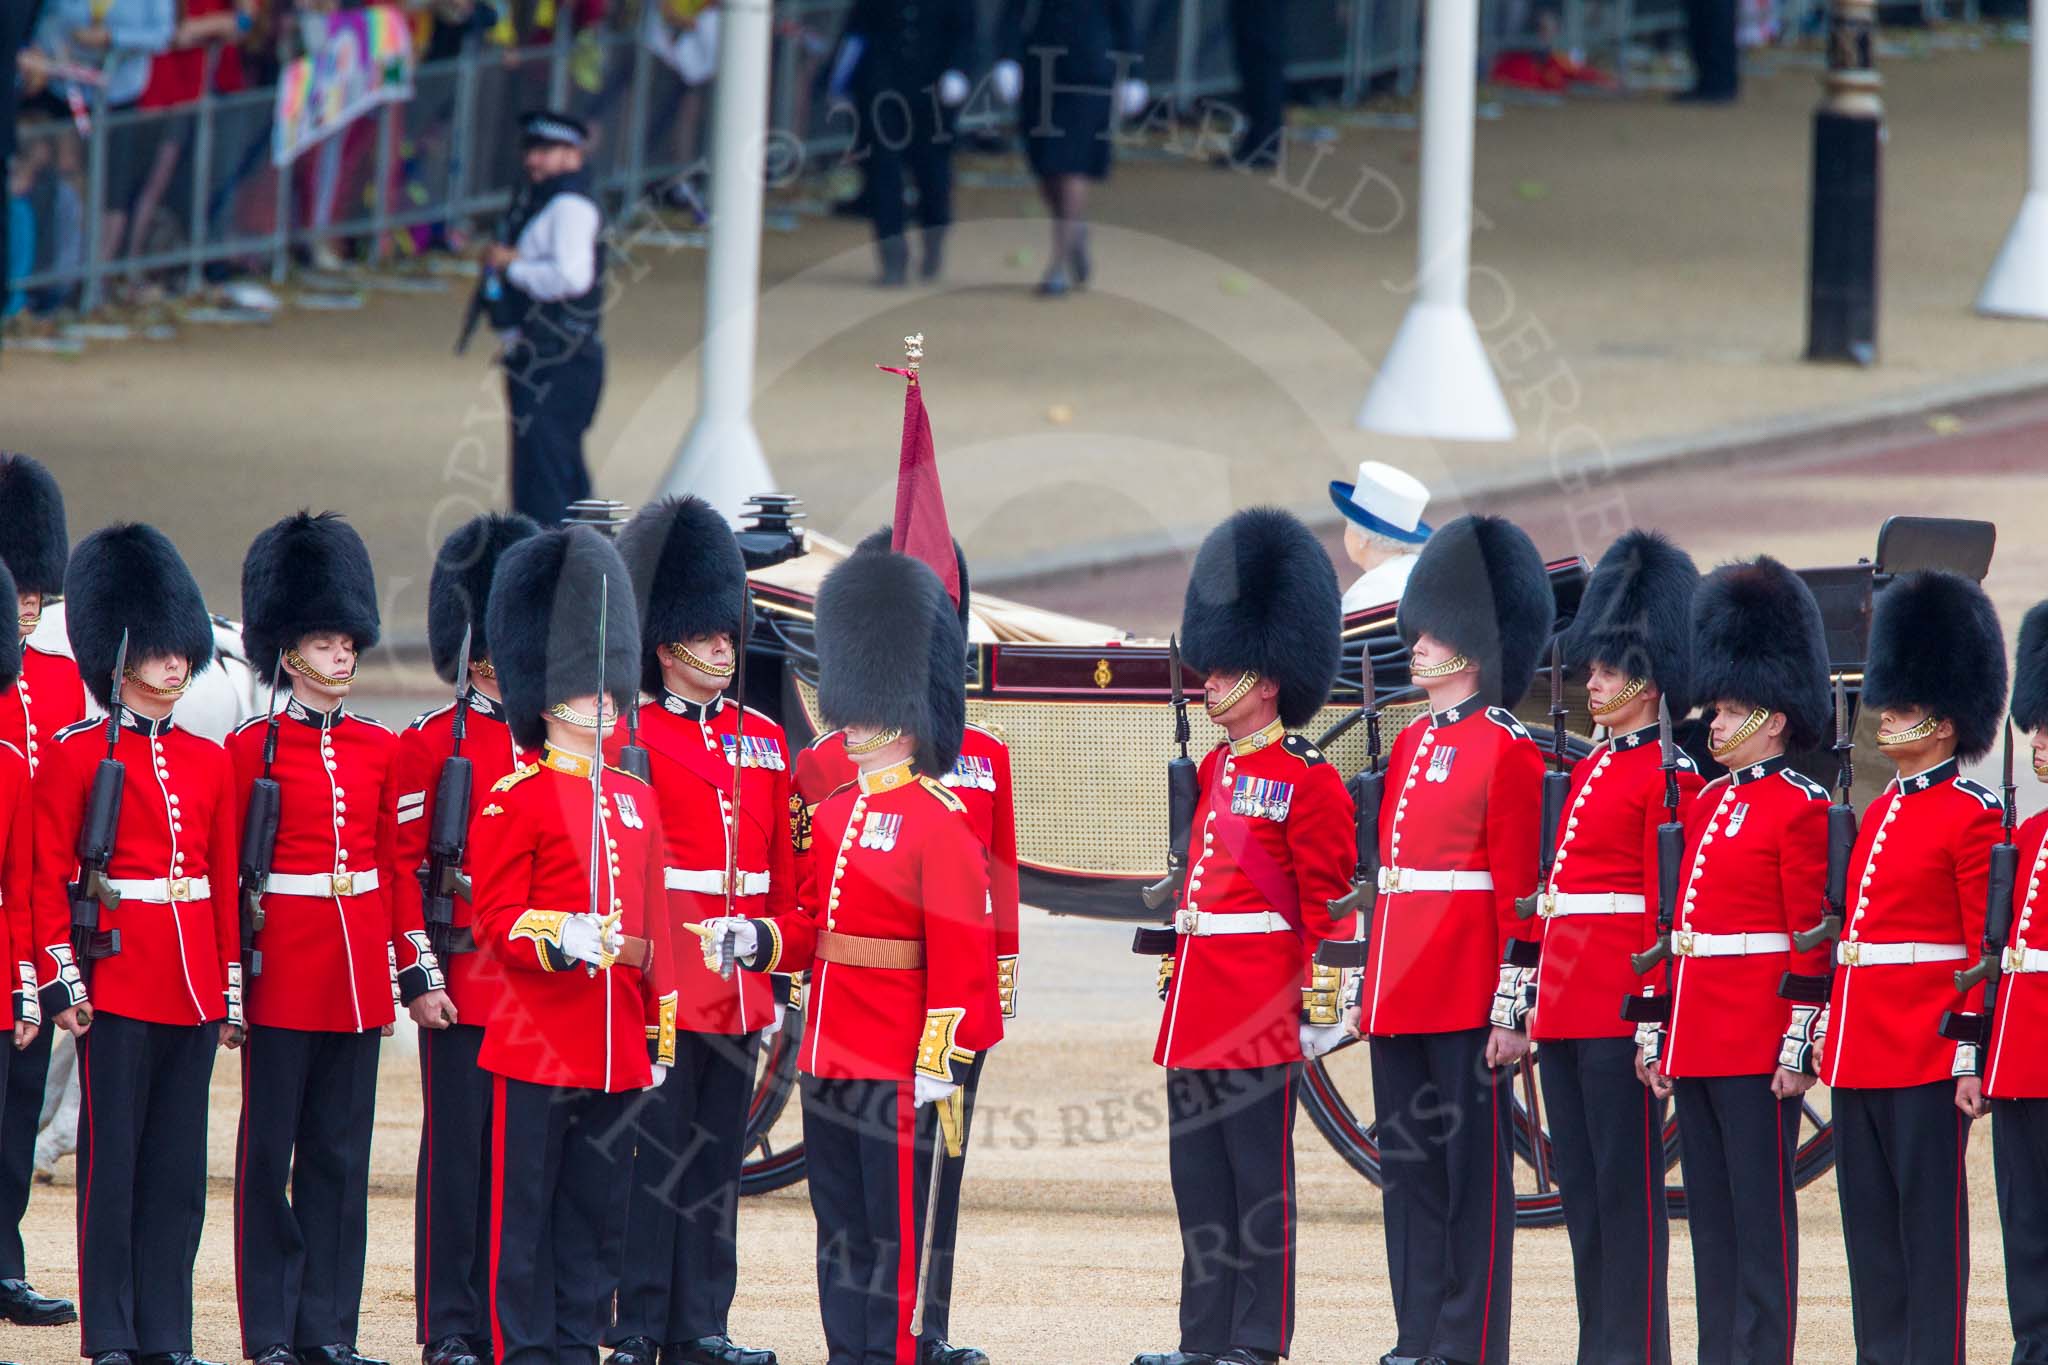 Trooping the Colour 2014.
Horse Guards Parade, Westminster,
London SW1A,

United Kingdom,
on 14 June 2014 at 11:05, image #425